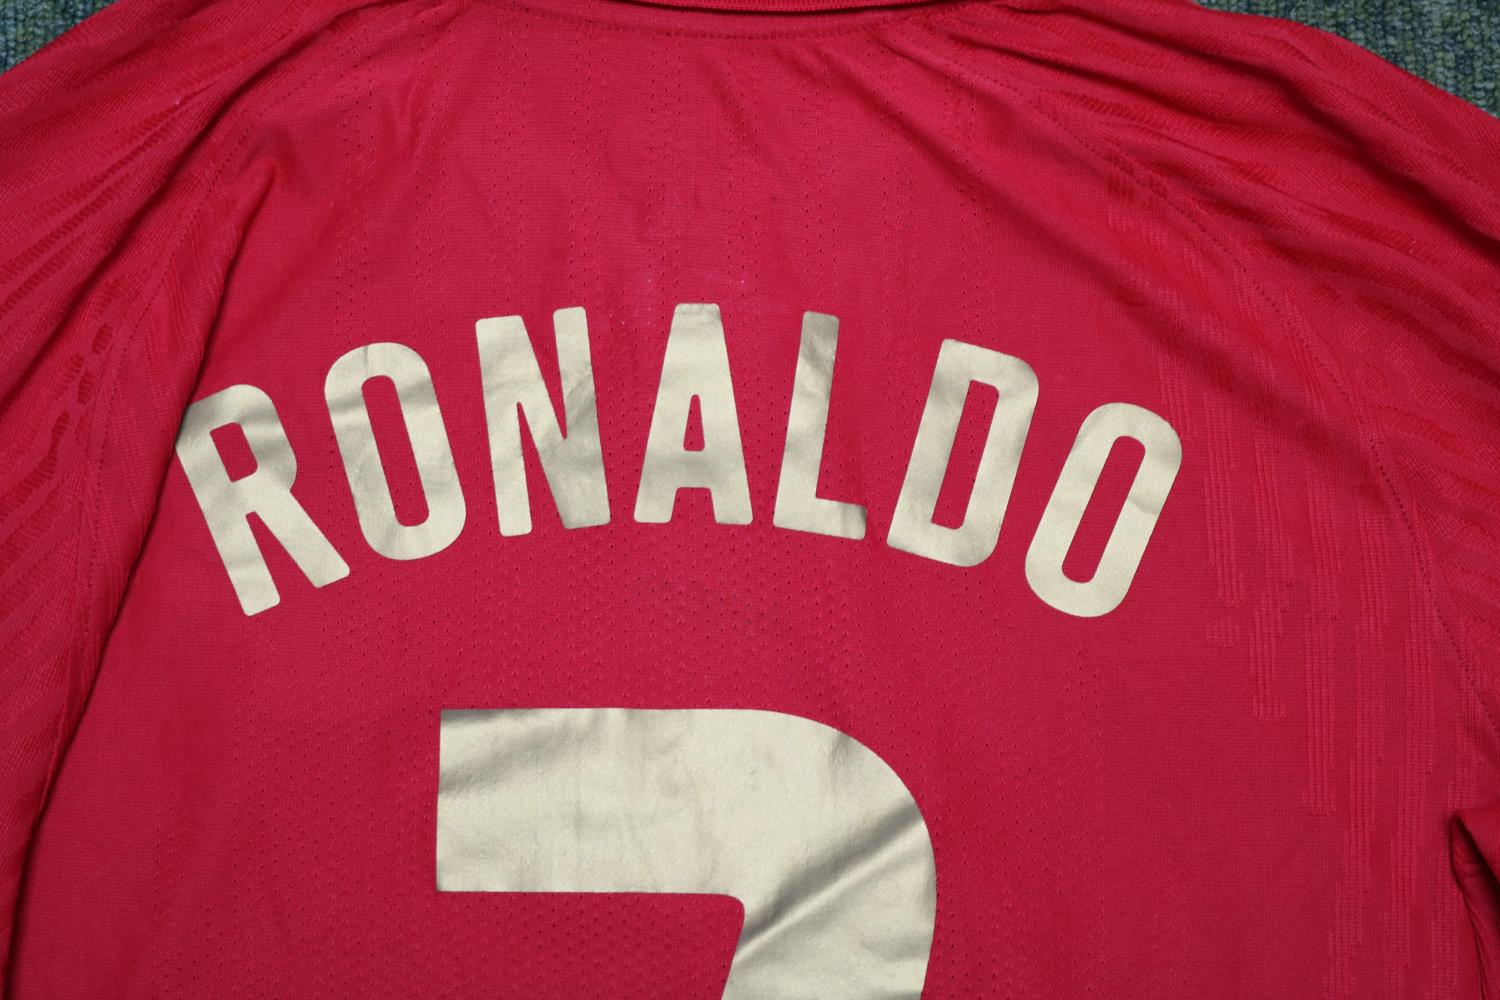 CRISTIANO RONALDO UEFA EURO 2020 MATCH WORN PORTUGAL JERSEY A Nike red #7 Portugal jersey which - Image 8 of 9